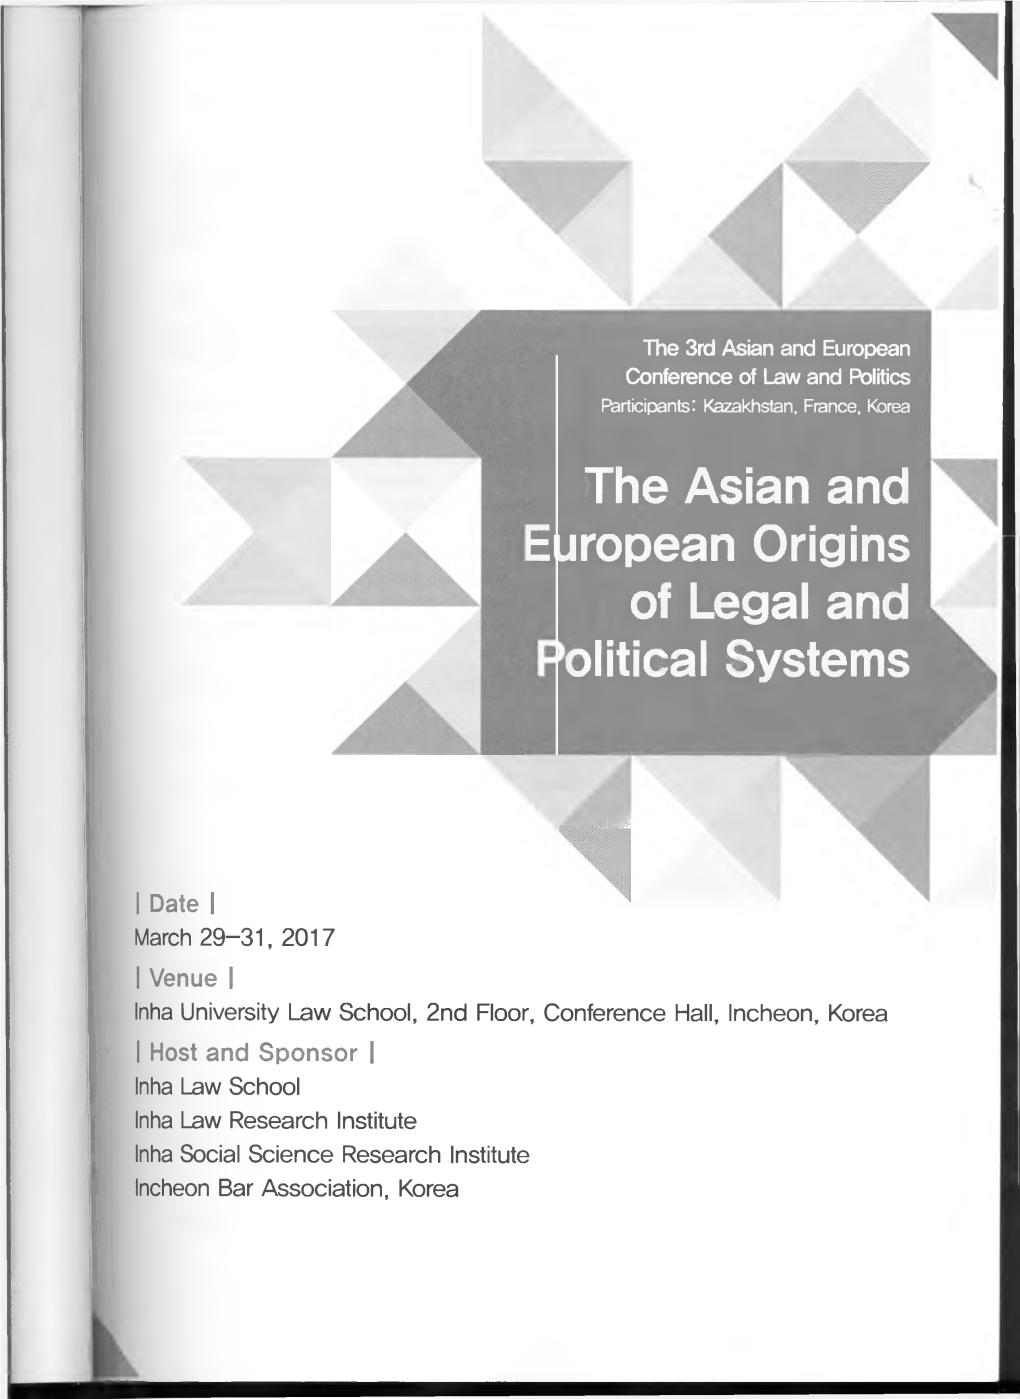 The Asian and European Origins of Legal and Olitical Systems